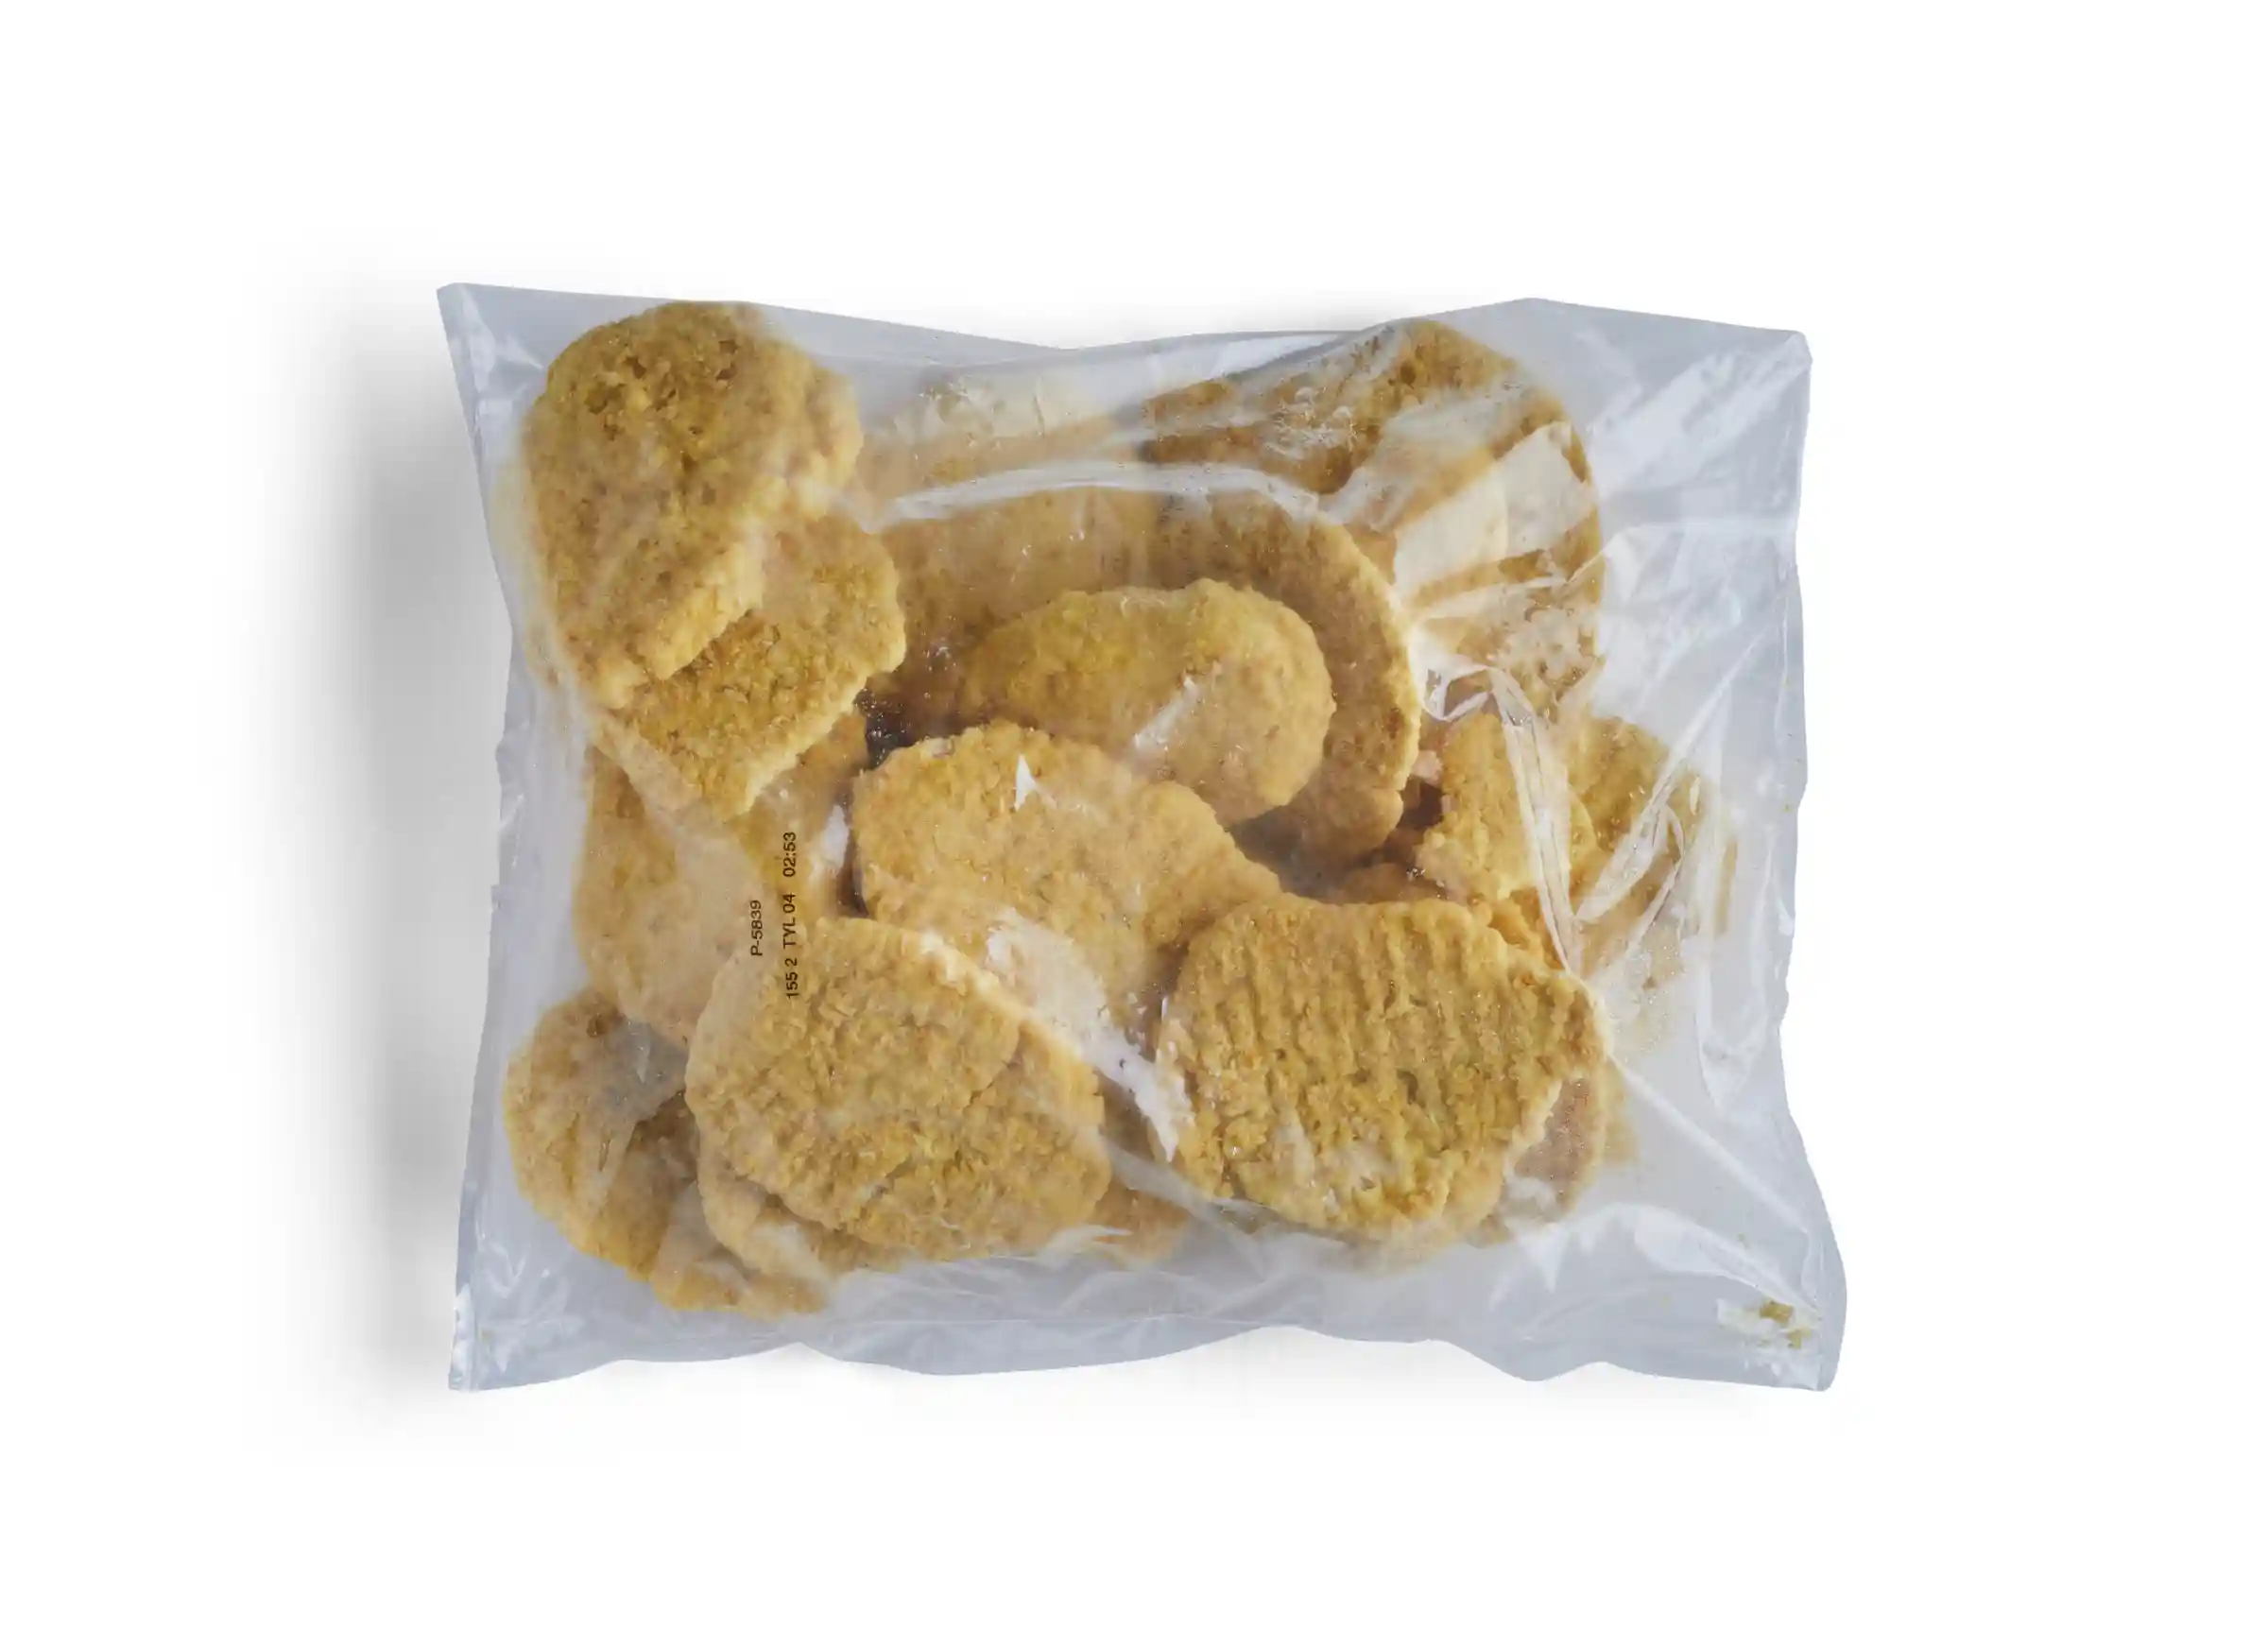 Tyson Red Label® Uncooked Golden Crispy Select Cut Chicken Breast Filet Fritters, 4 oz. _image_21